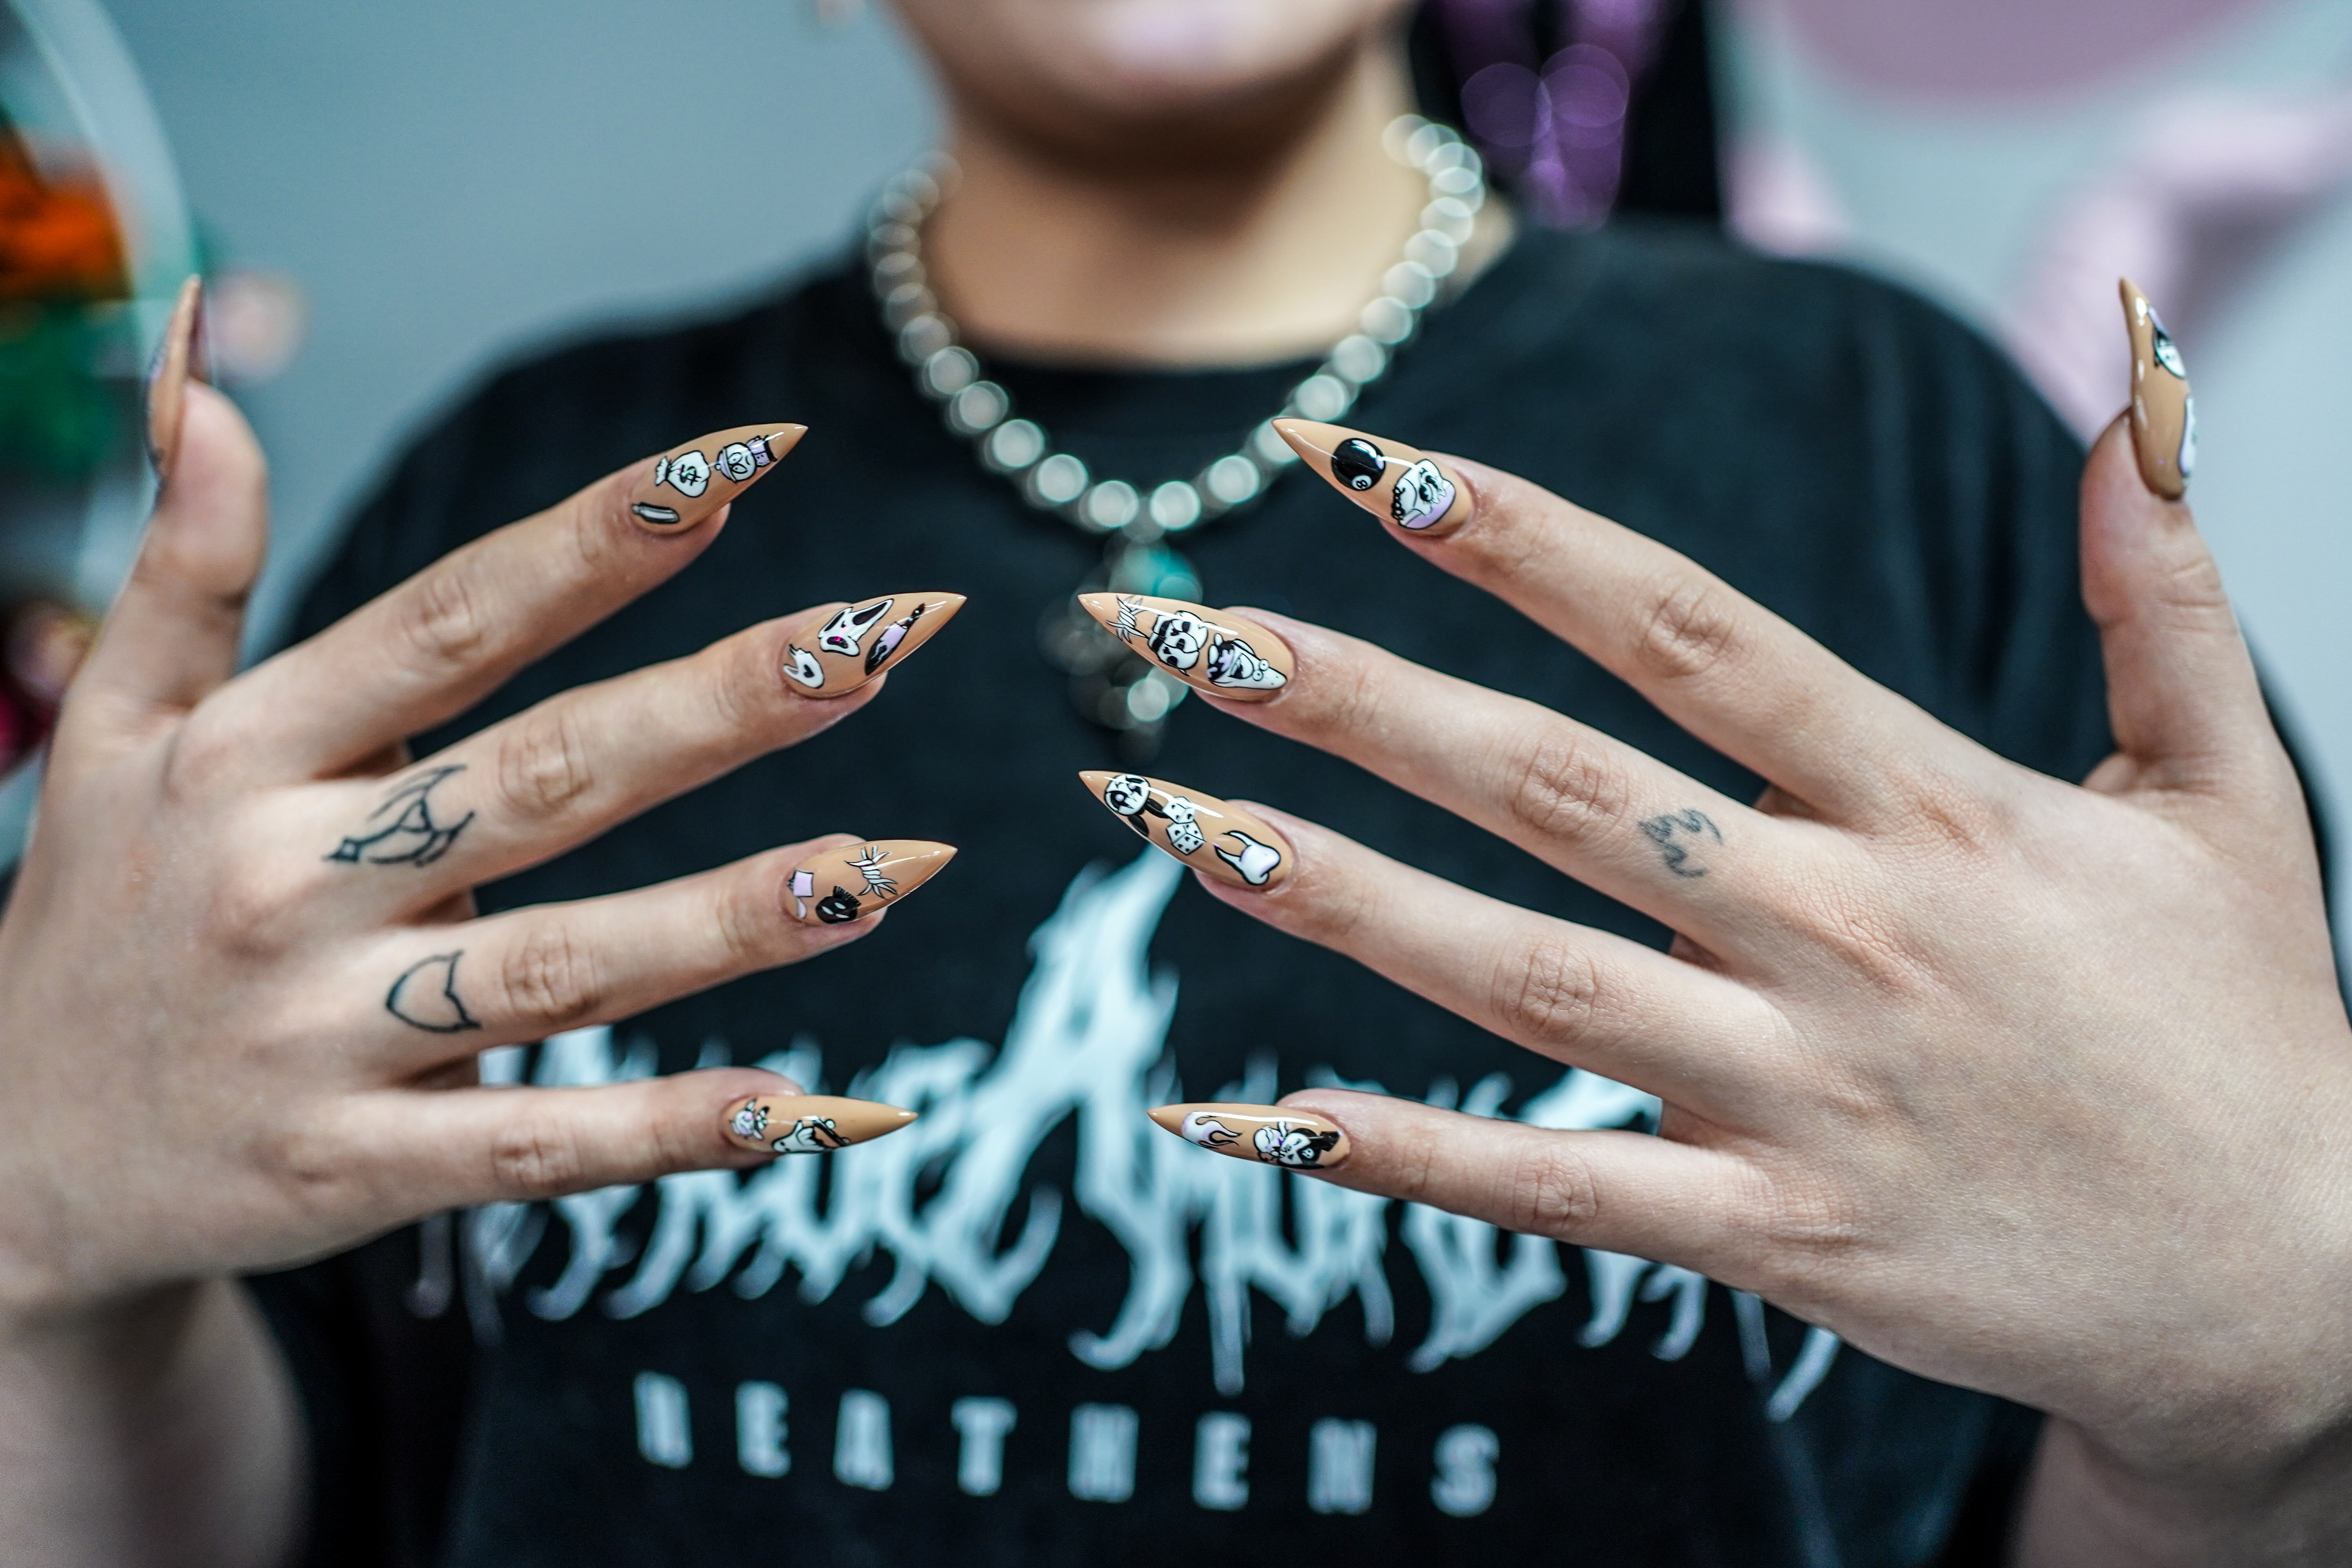 Weed Nail Art Is A Thing If You're Interested In A 420-Friendly Manicure